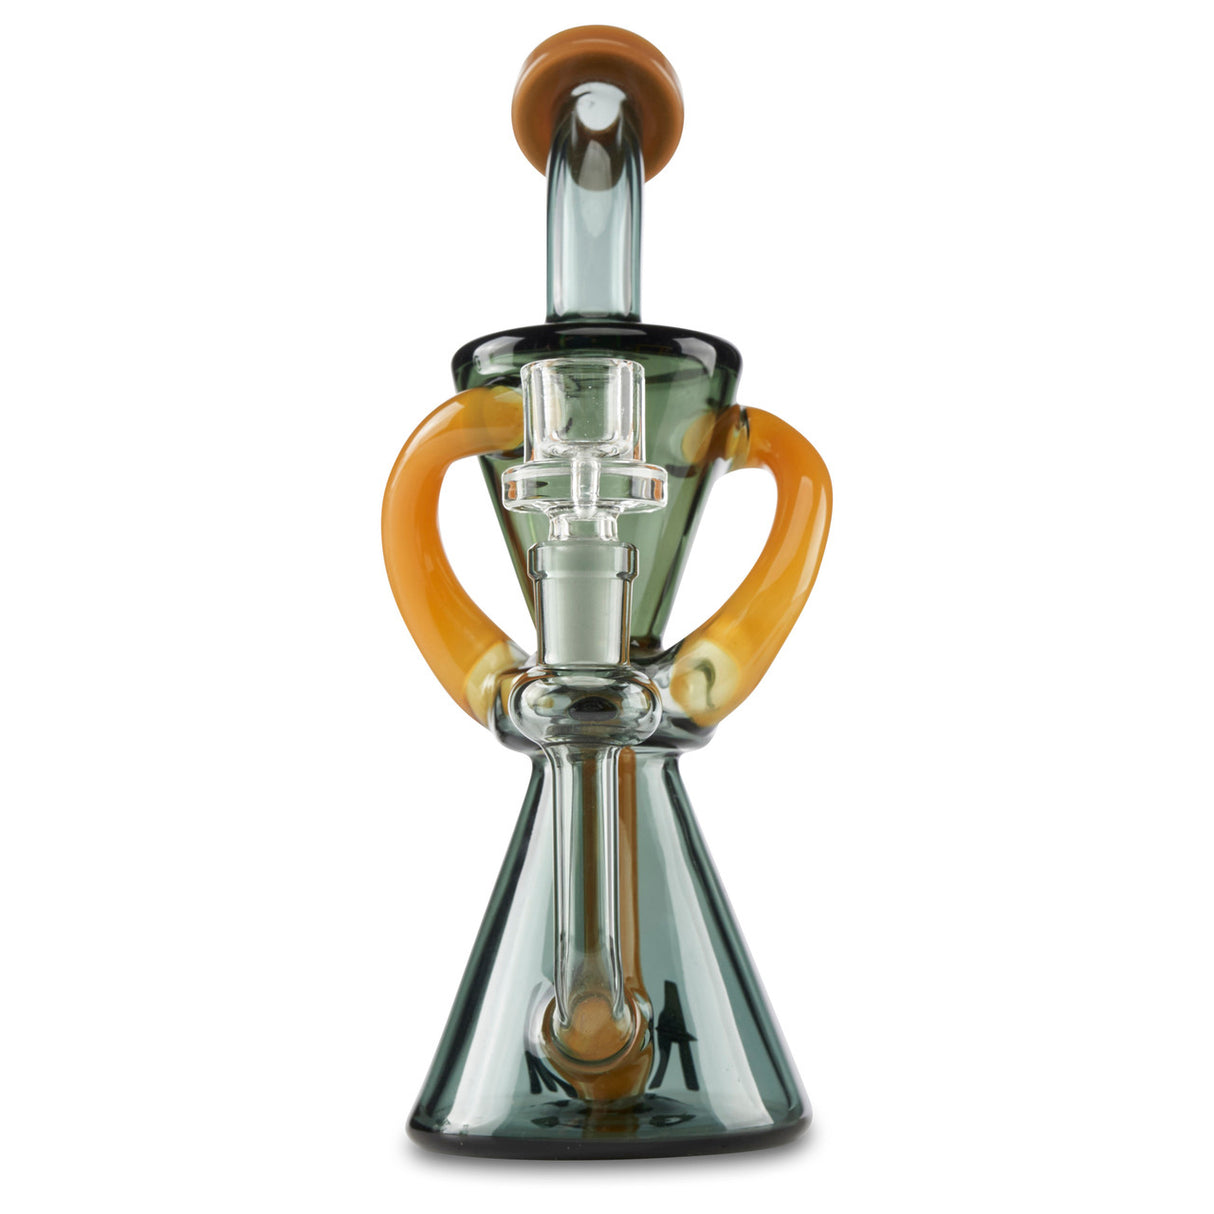 AFM Double Arm Recycler